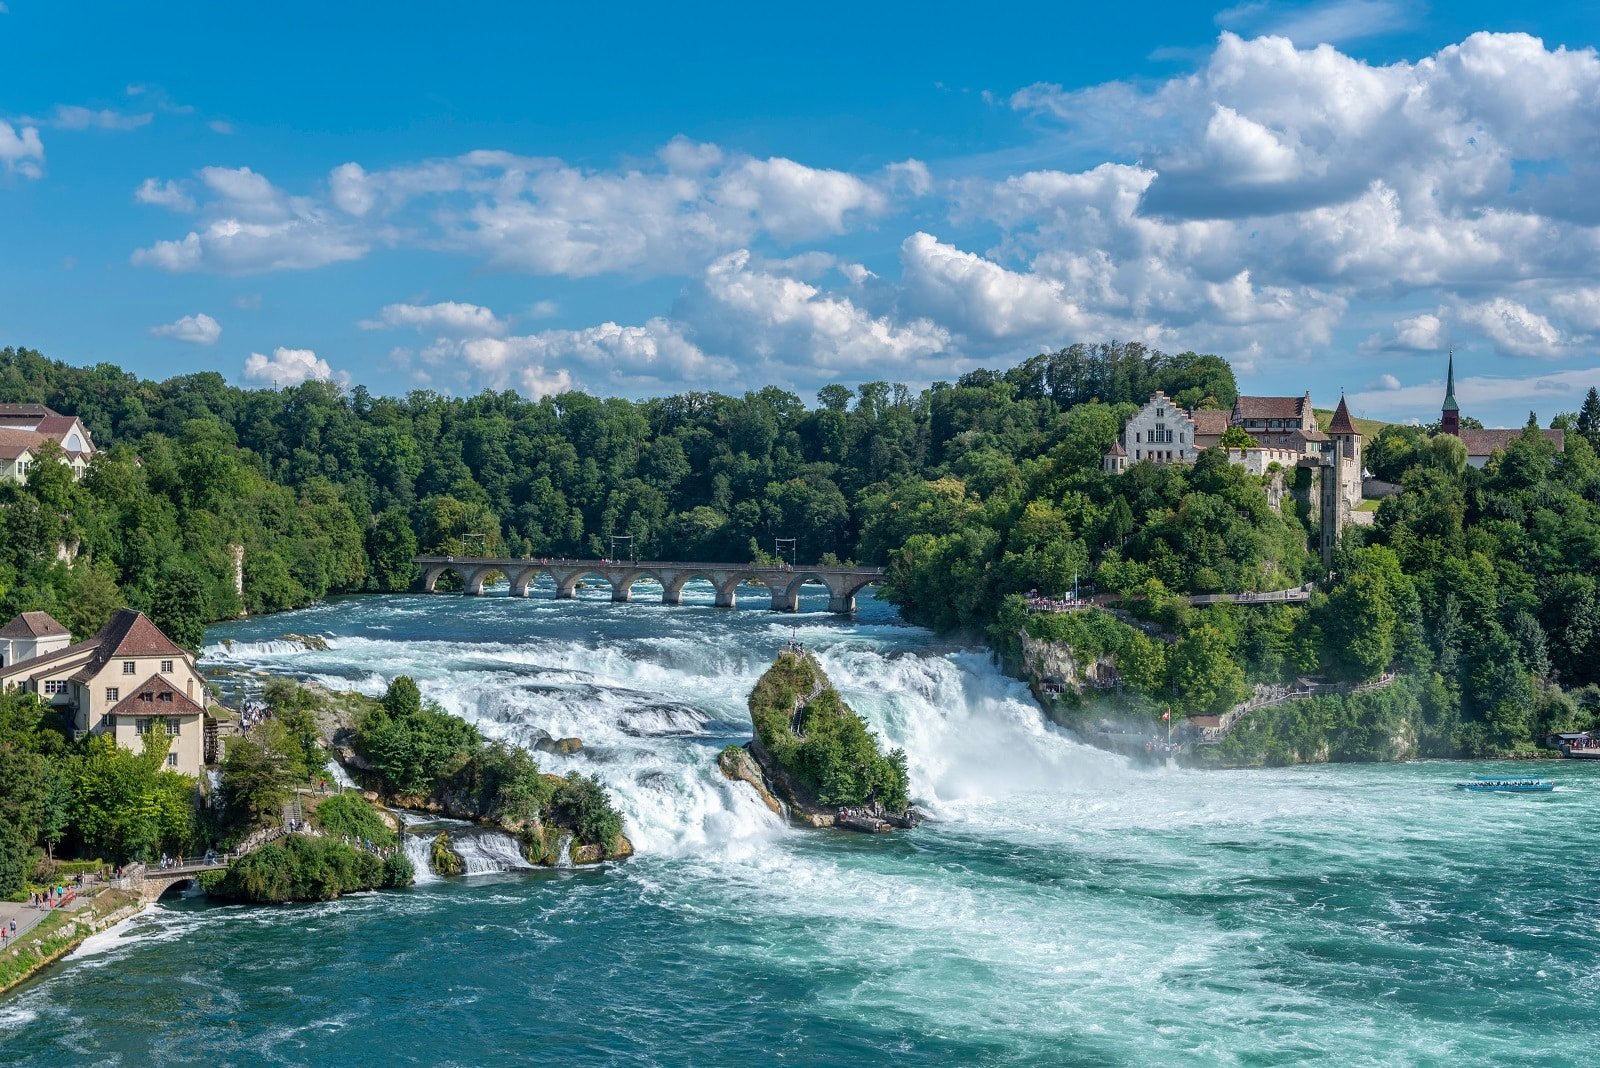 <p><span>Visit Rhine Falls near Schaffhausen, Switzerland, to witness one of Europe’s most powerful waterfalls. The falls are impressive for their size and the sheer volume of water cascading over a breadth of 150 meters. Boat trips take you up close to the falls, and several viewing platforms along the river provide different perspectives on this natural spectacle. The area around the falls is ideal for leisurely walks or picnics, making it a perfect day trip destination.</span></p> <p><b>Insider’s Tip: </b><span>Take a boat trip to the rock in the middle of the falls for an up-close experience. </span></p> <p><b>When To Travel: </b><span>Summer for boat trips and the best weather. </span></p> <p><b>How To Get There: </b><span>Drive or take a train to Schaffhausen, then a bus to the falls.</span></p>